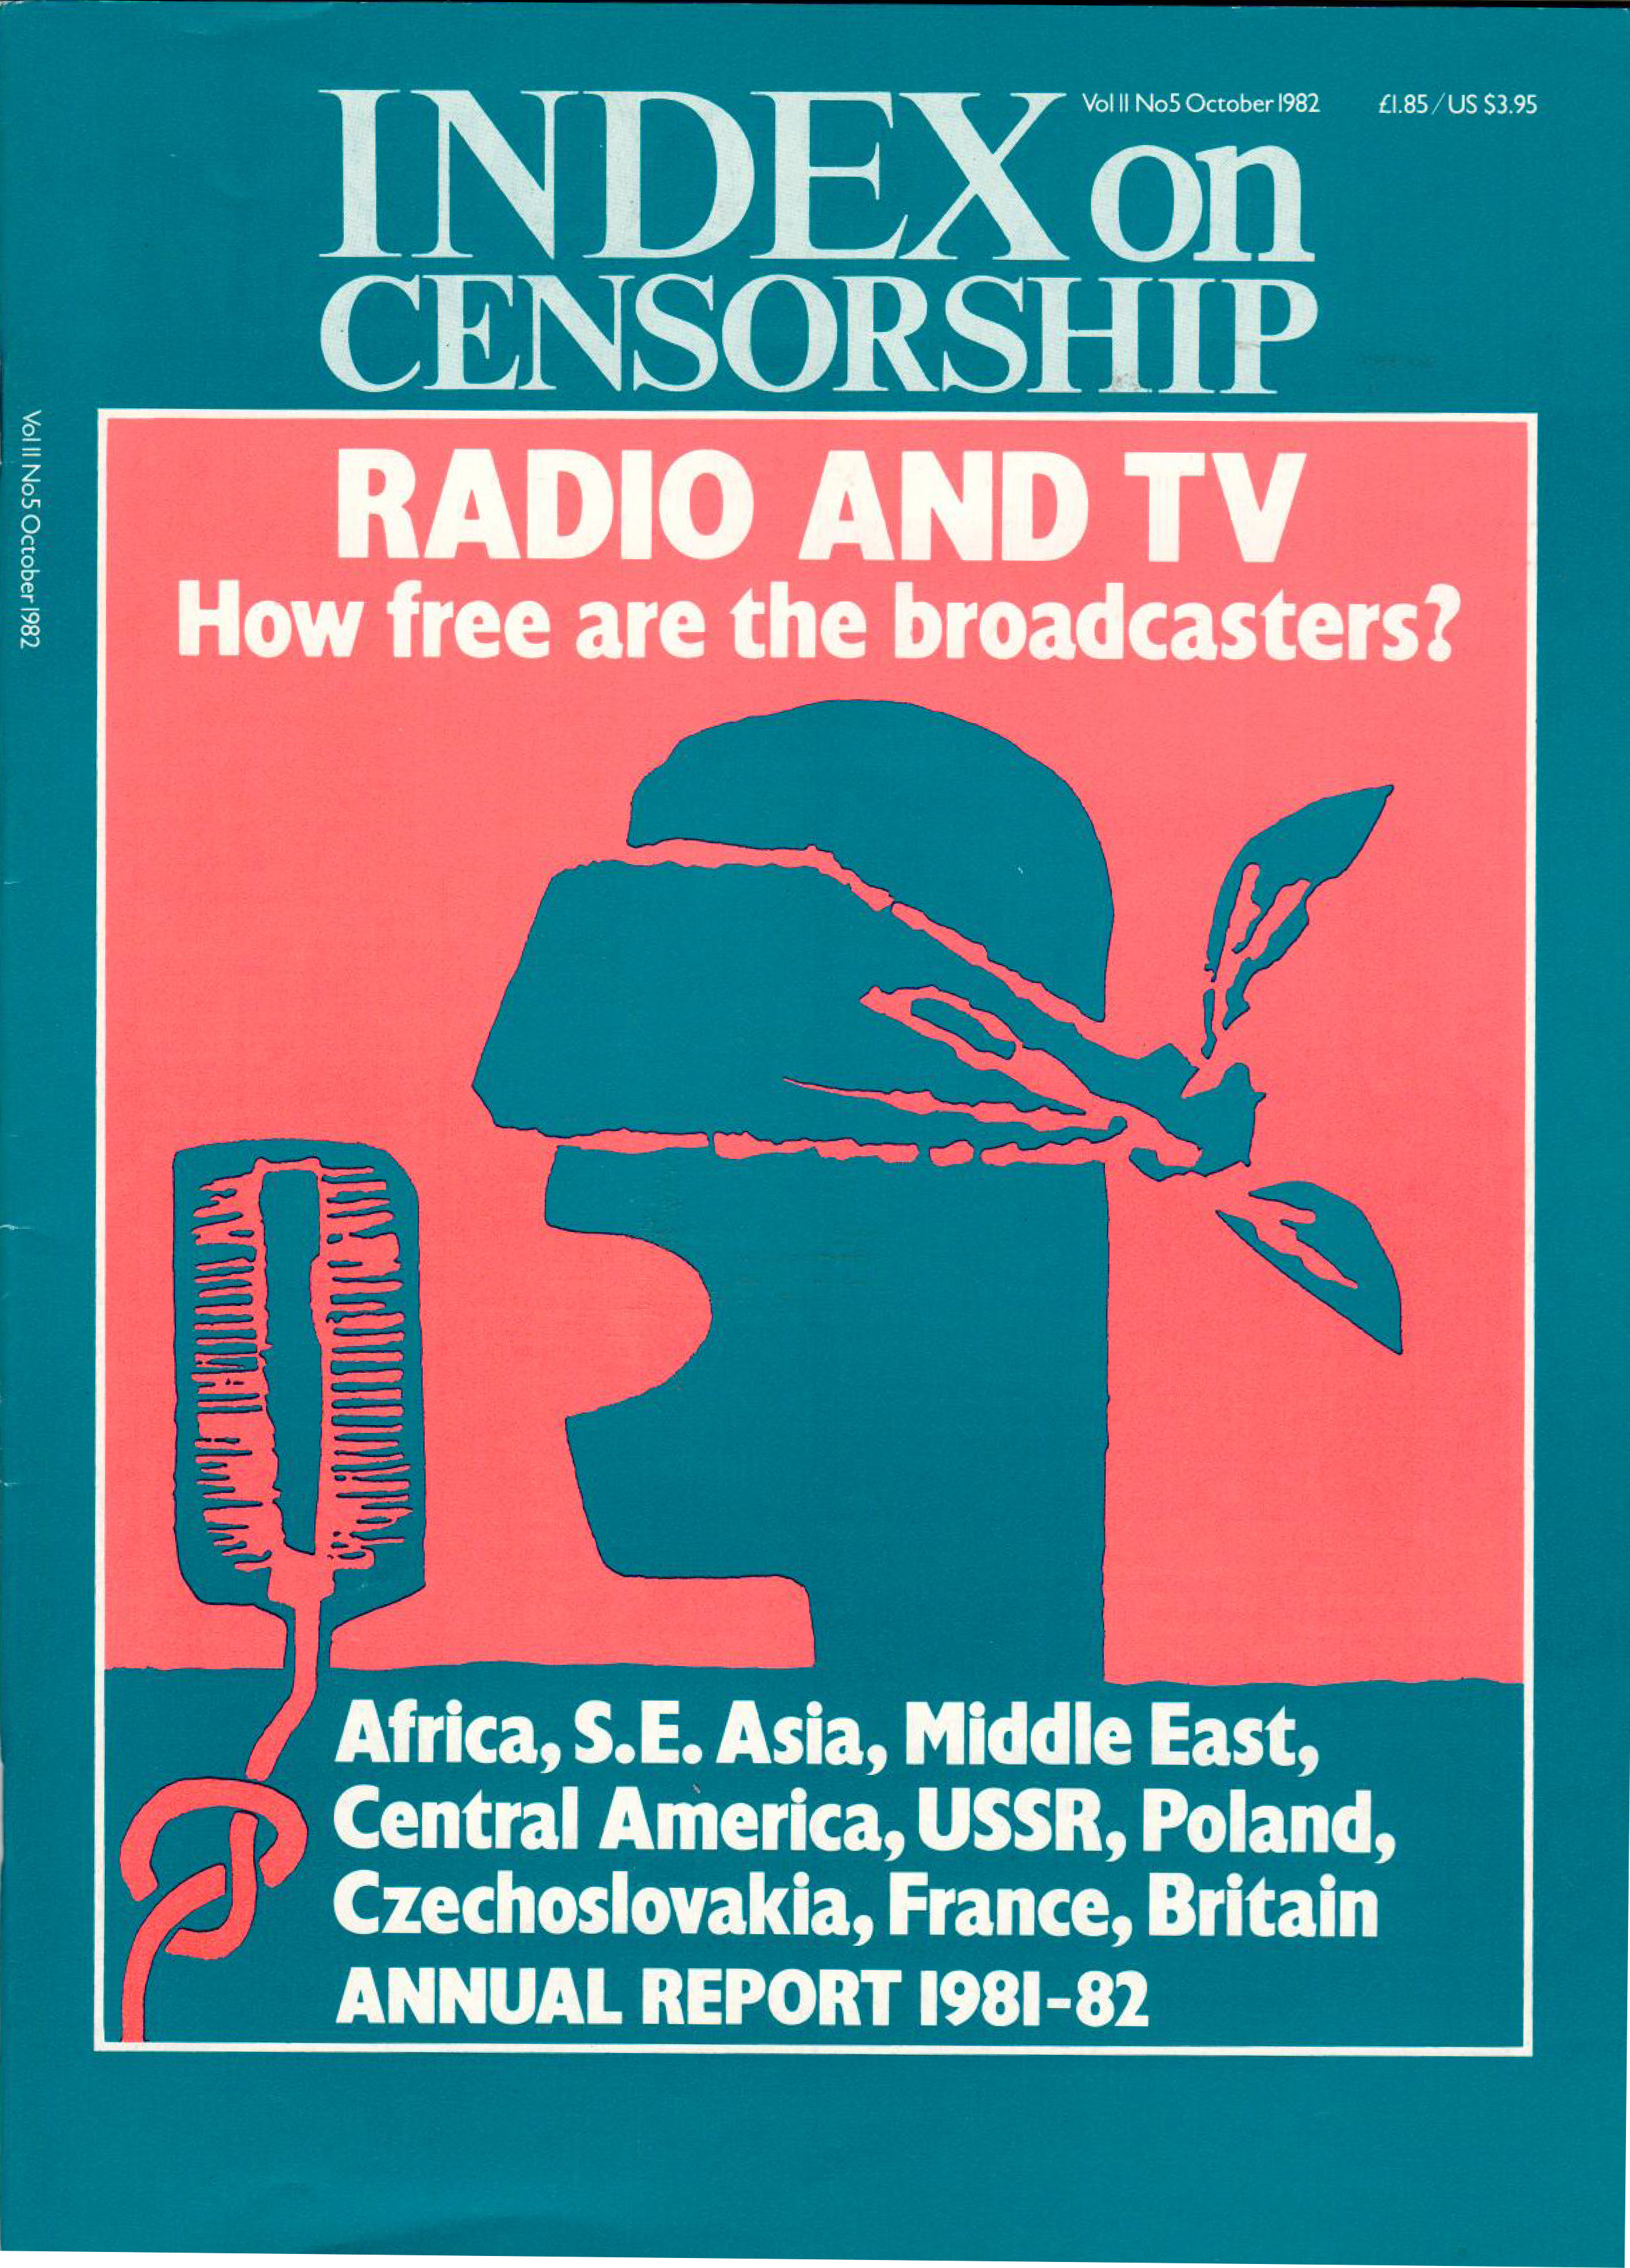 Radio and TV, the October 1982 issue of Index on Censorship magazine.